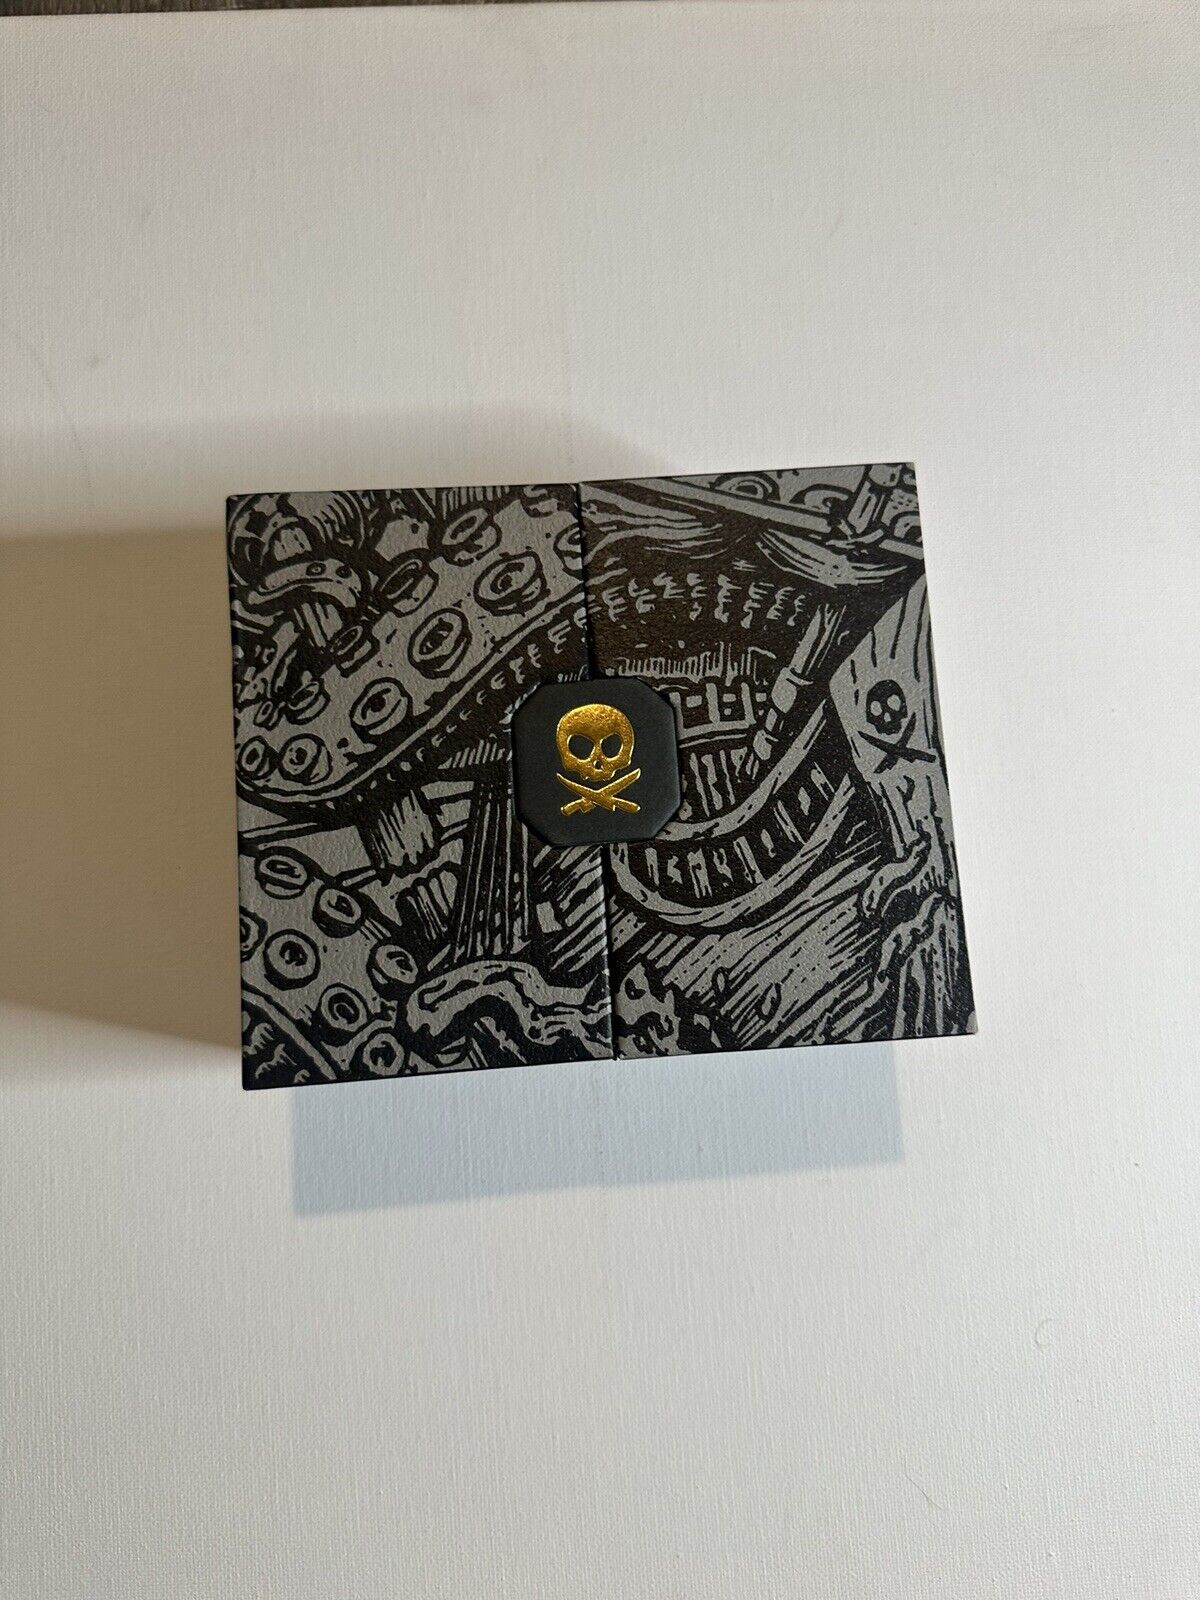 Pete’s Pirate Life V2 Coin